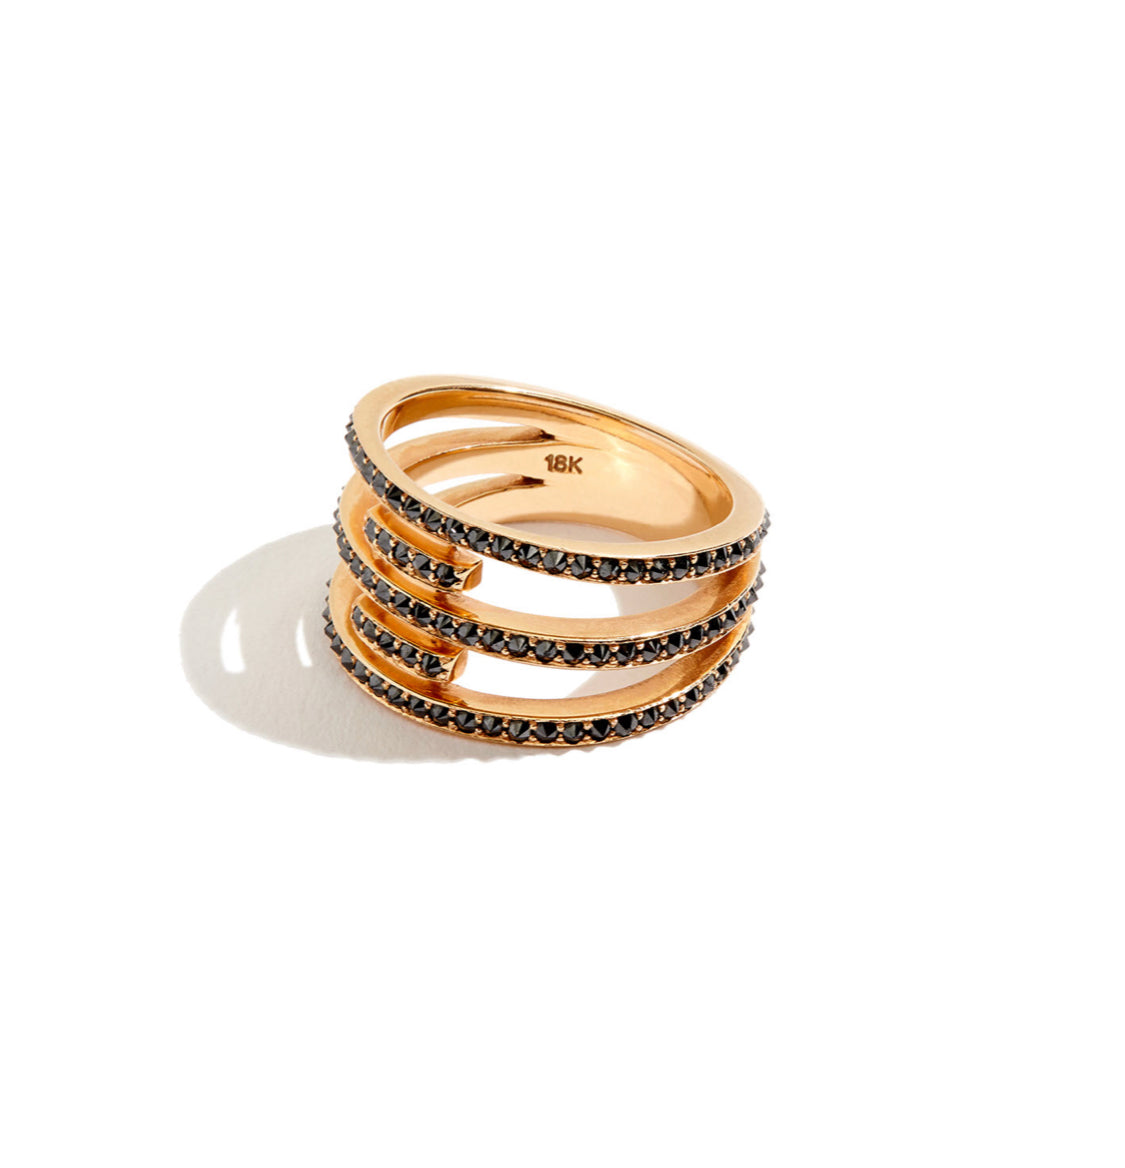 Three band Rose gold and black diamond ring on white background